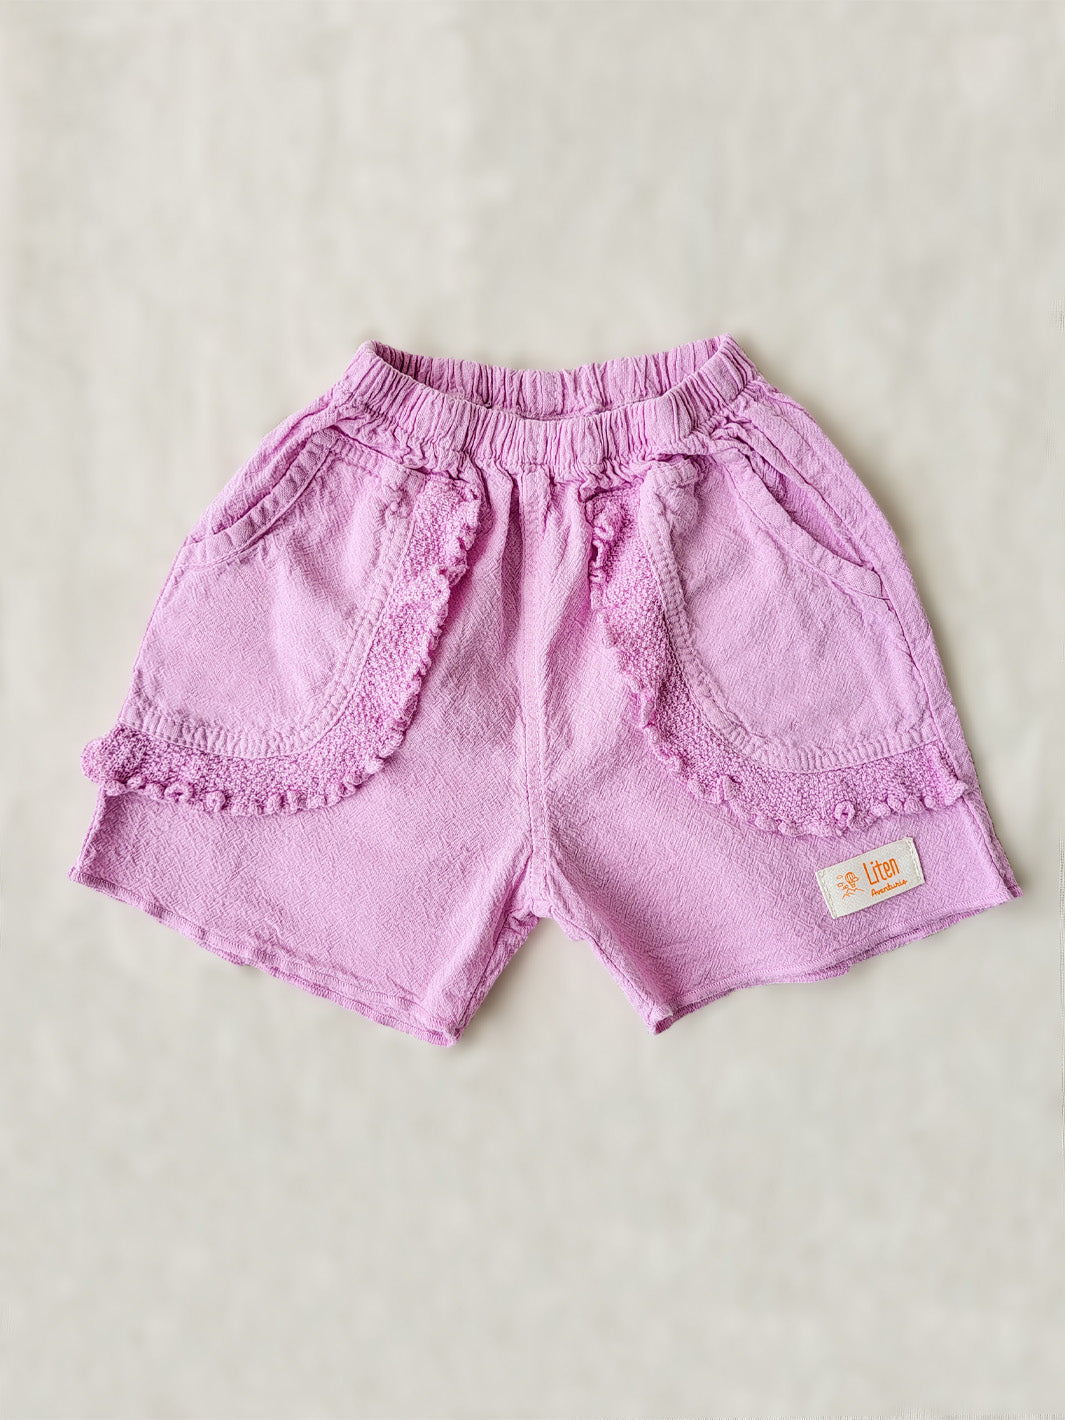 Take her on an adventure in style with these Liss Shorts! Made from natural cotton in a vibrant Malva pink color, they're the perfect combo of cute and comfy. And of course, those front pockets with knitted cotton ruffles - because no outfit is complete without a little something extra! Pair the Liss Shorts with any top from our Liten Aventuris collections and your little one will be ready to take on any challenge! Flickan kortbyxor, barn bomullskläder.